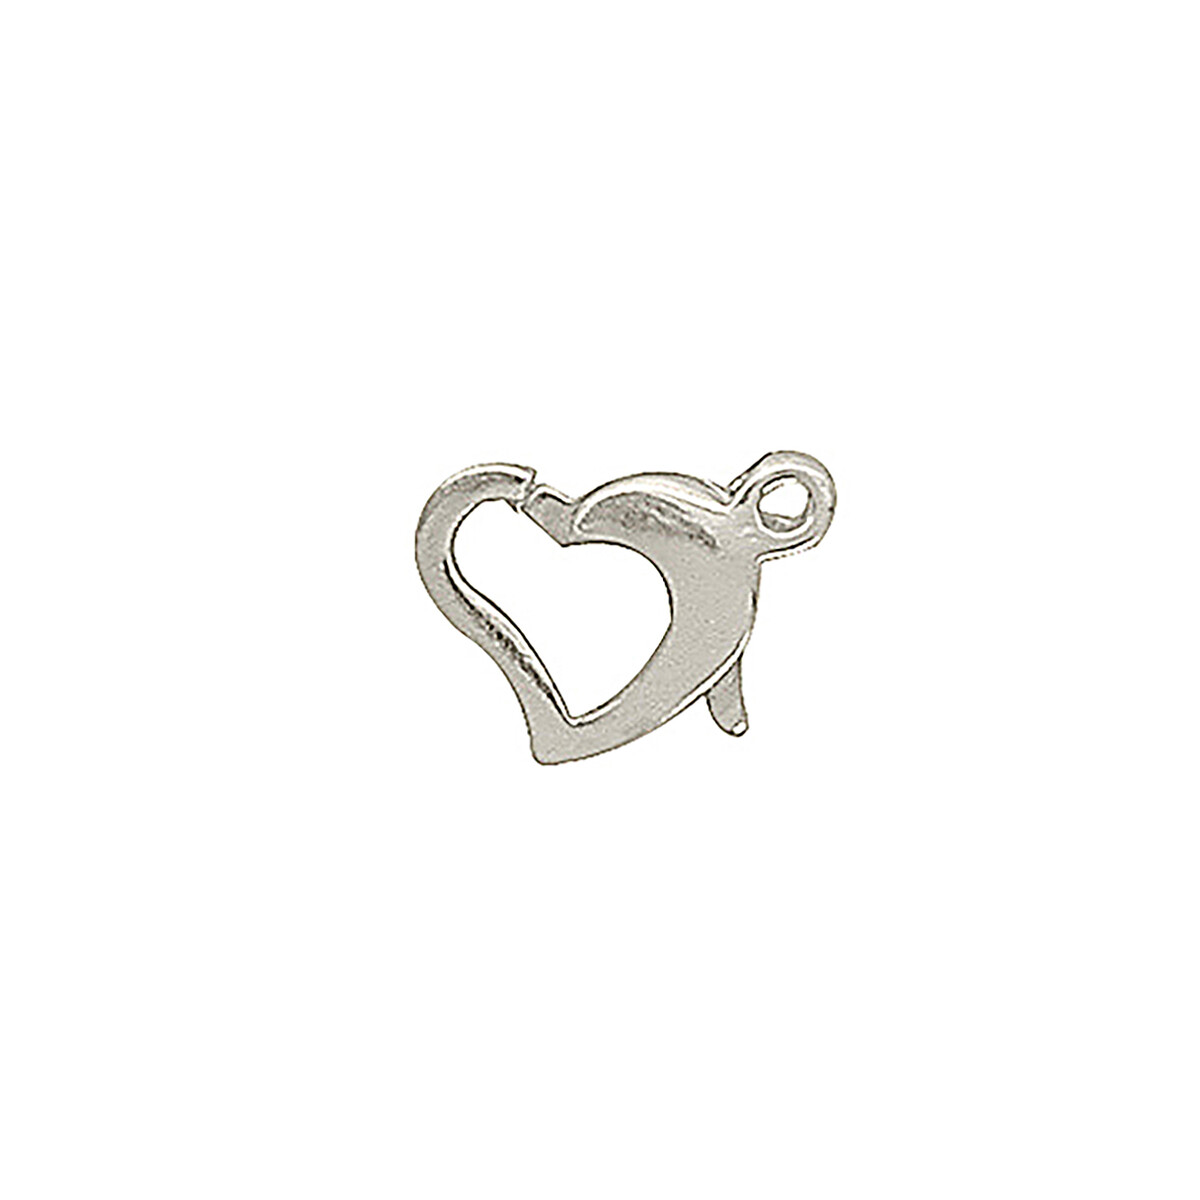 Heart Shaped Sterling Silver Clasp